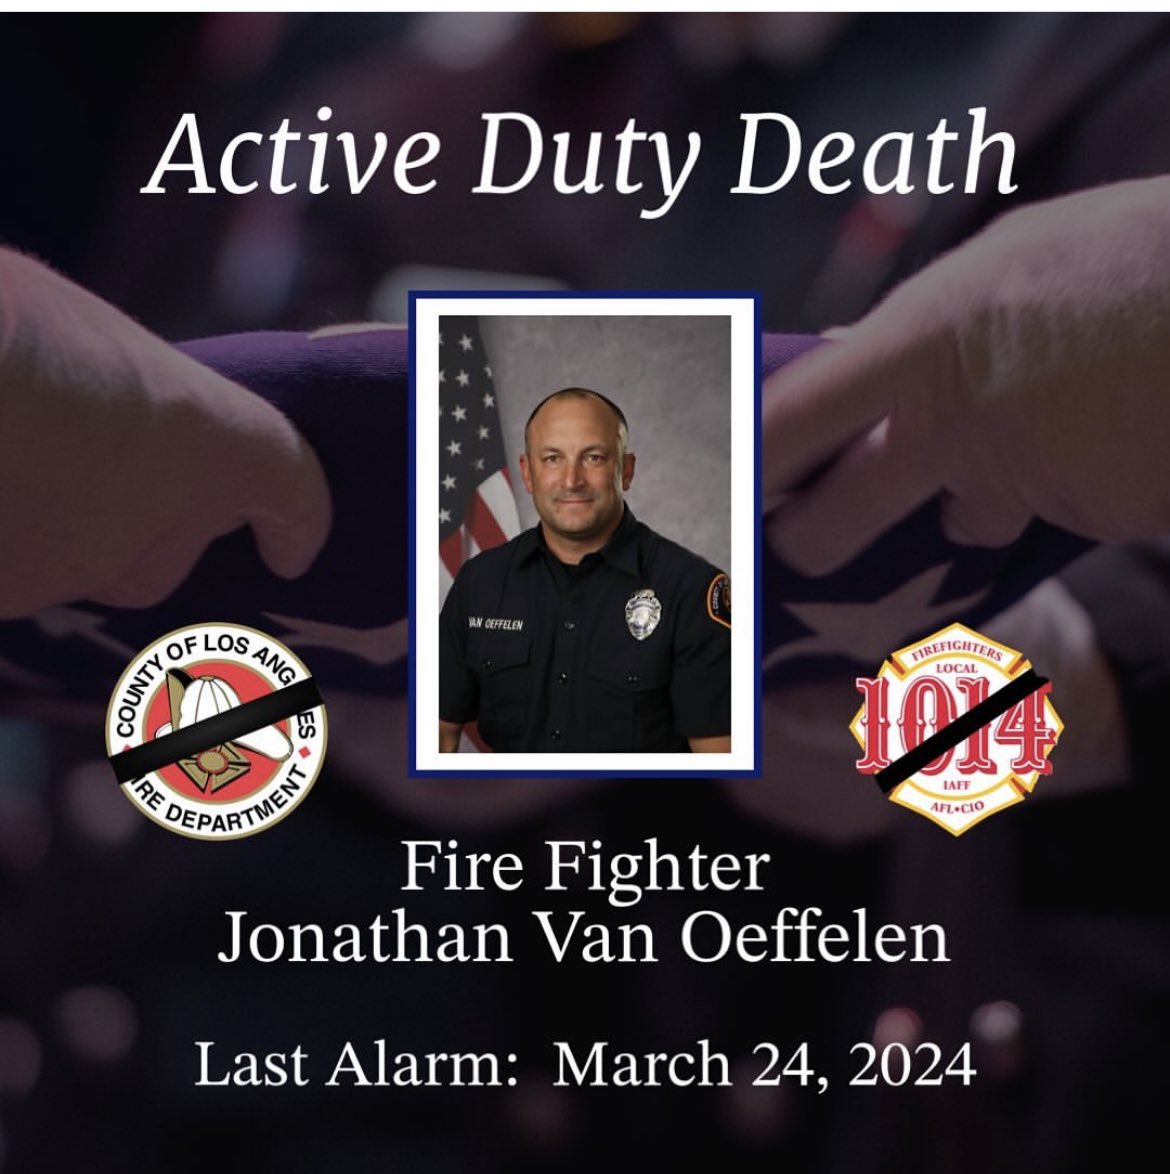 My prayers are with the members of our LA County Fire Department and the family and friends of Fire Fighter Jonathan Van Oeffelen. Fire Fighter Van Oeffelen was stationed at Fire Station 52 and worked everyday to protect the City of Vernon.